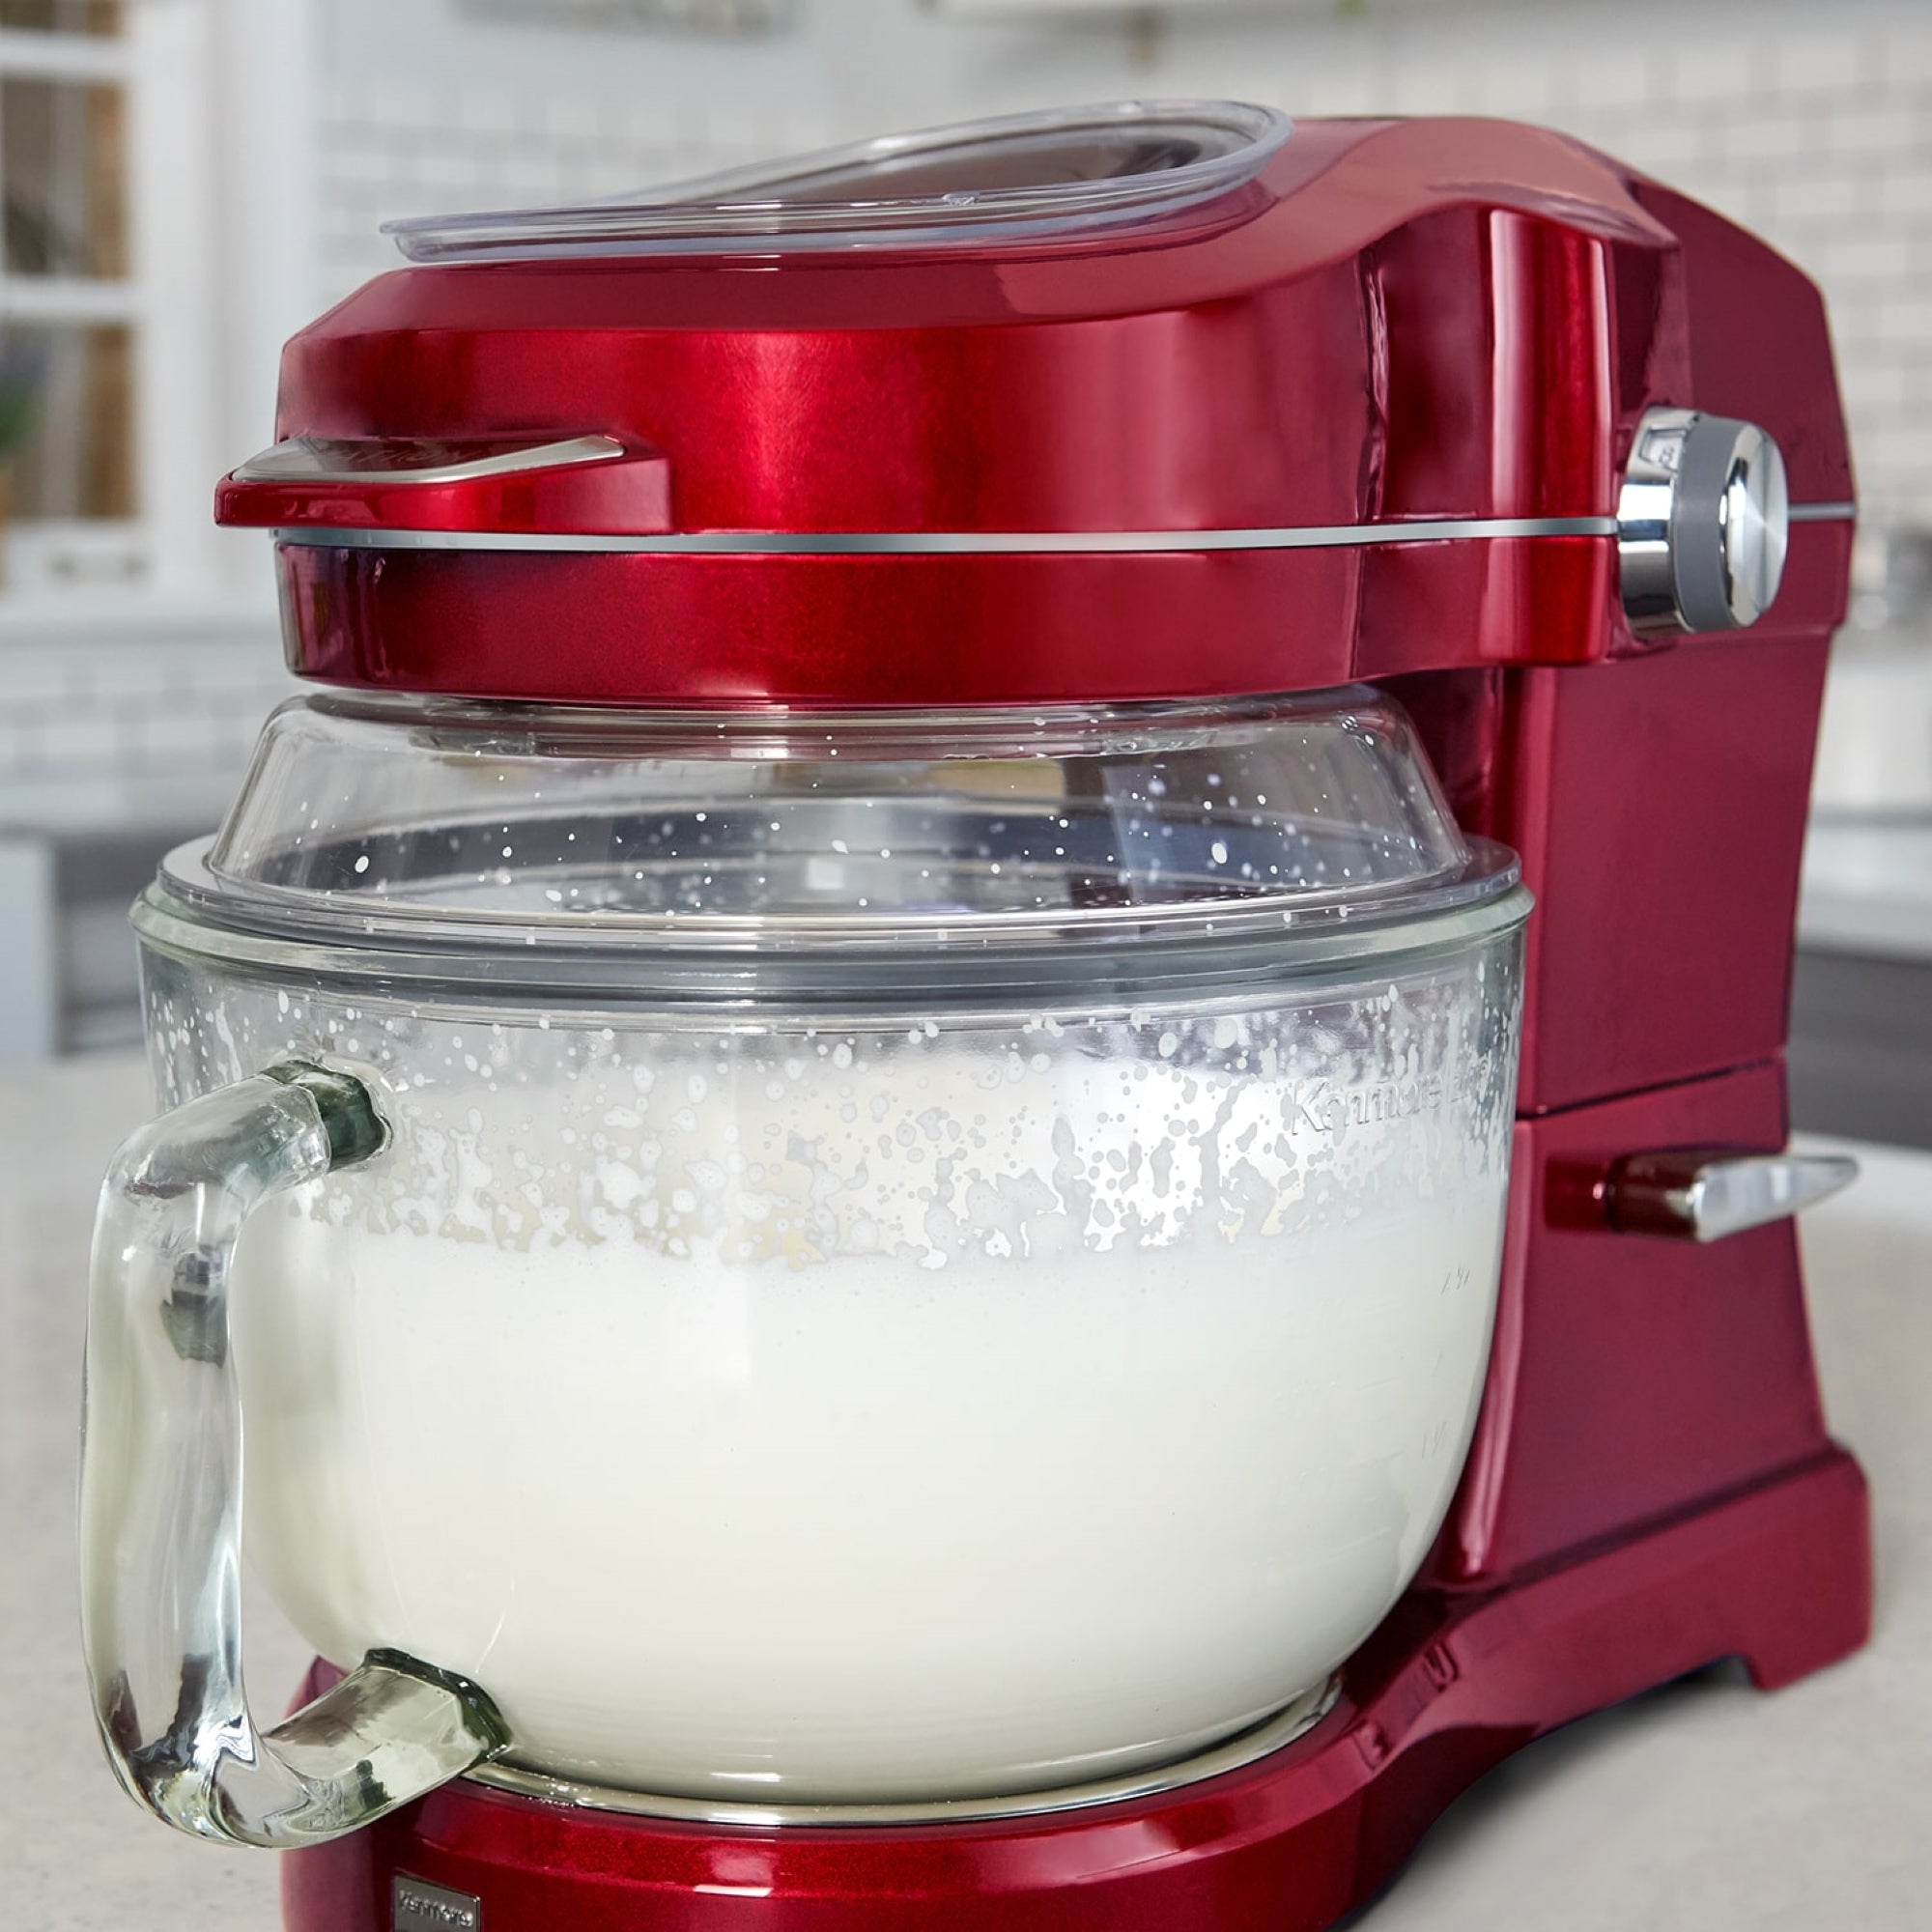 Closeup of the Kenmore Elite Ovation mixer with the bowl filled with cream